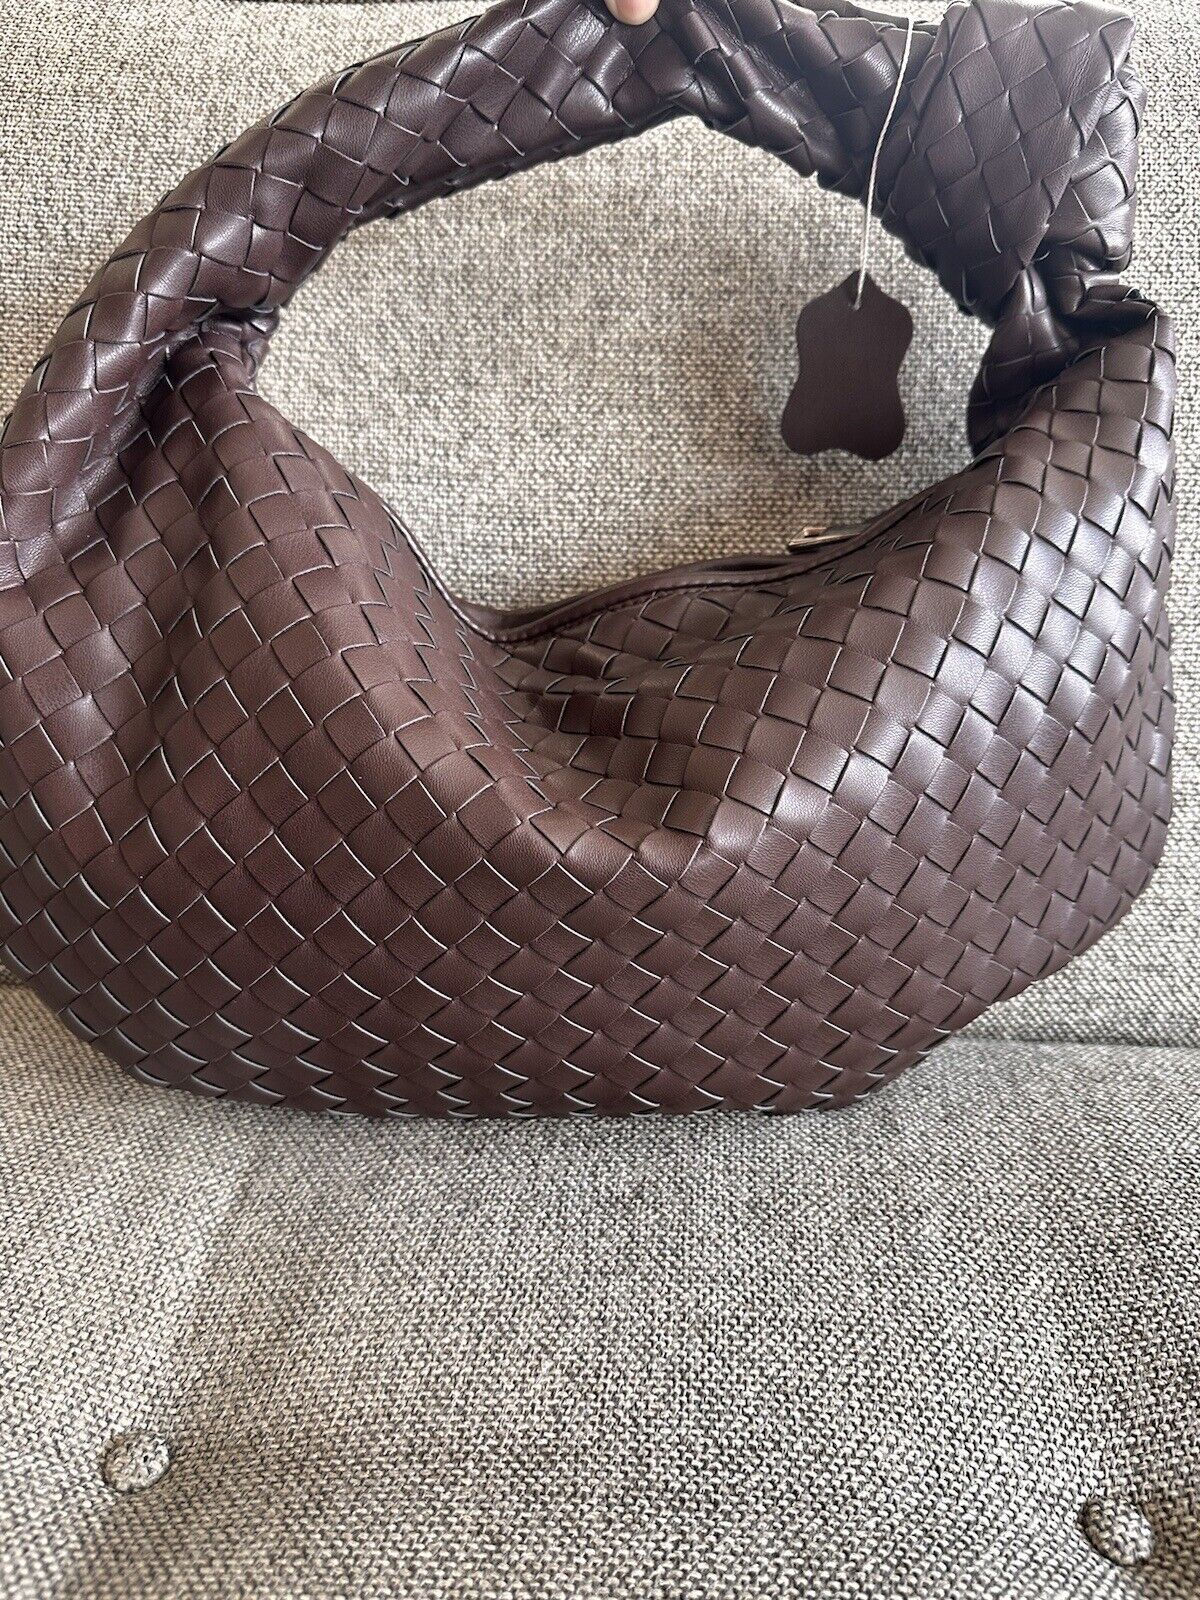 Woven Genuine Leather Brown Purse Bag Bottega Teen Jodie Dupe Chocolate NWT